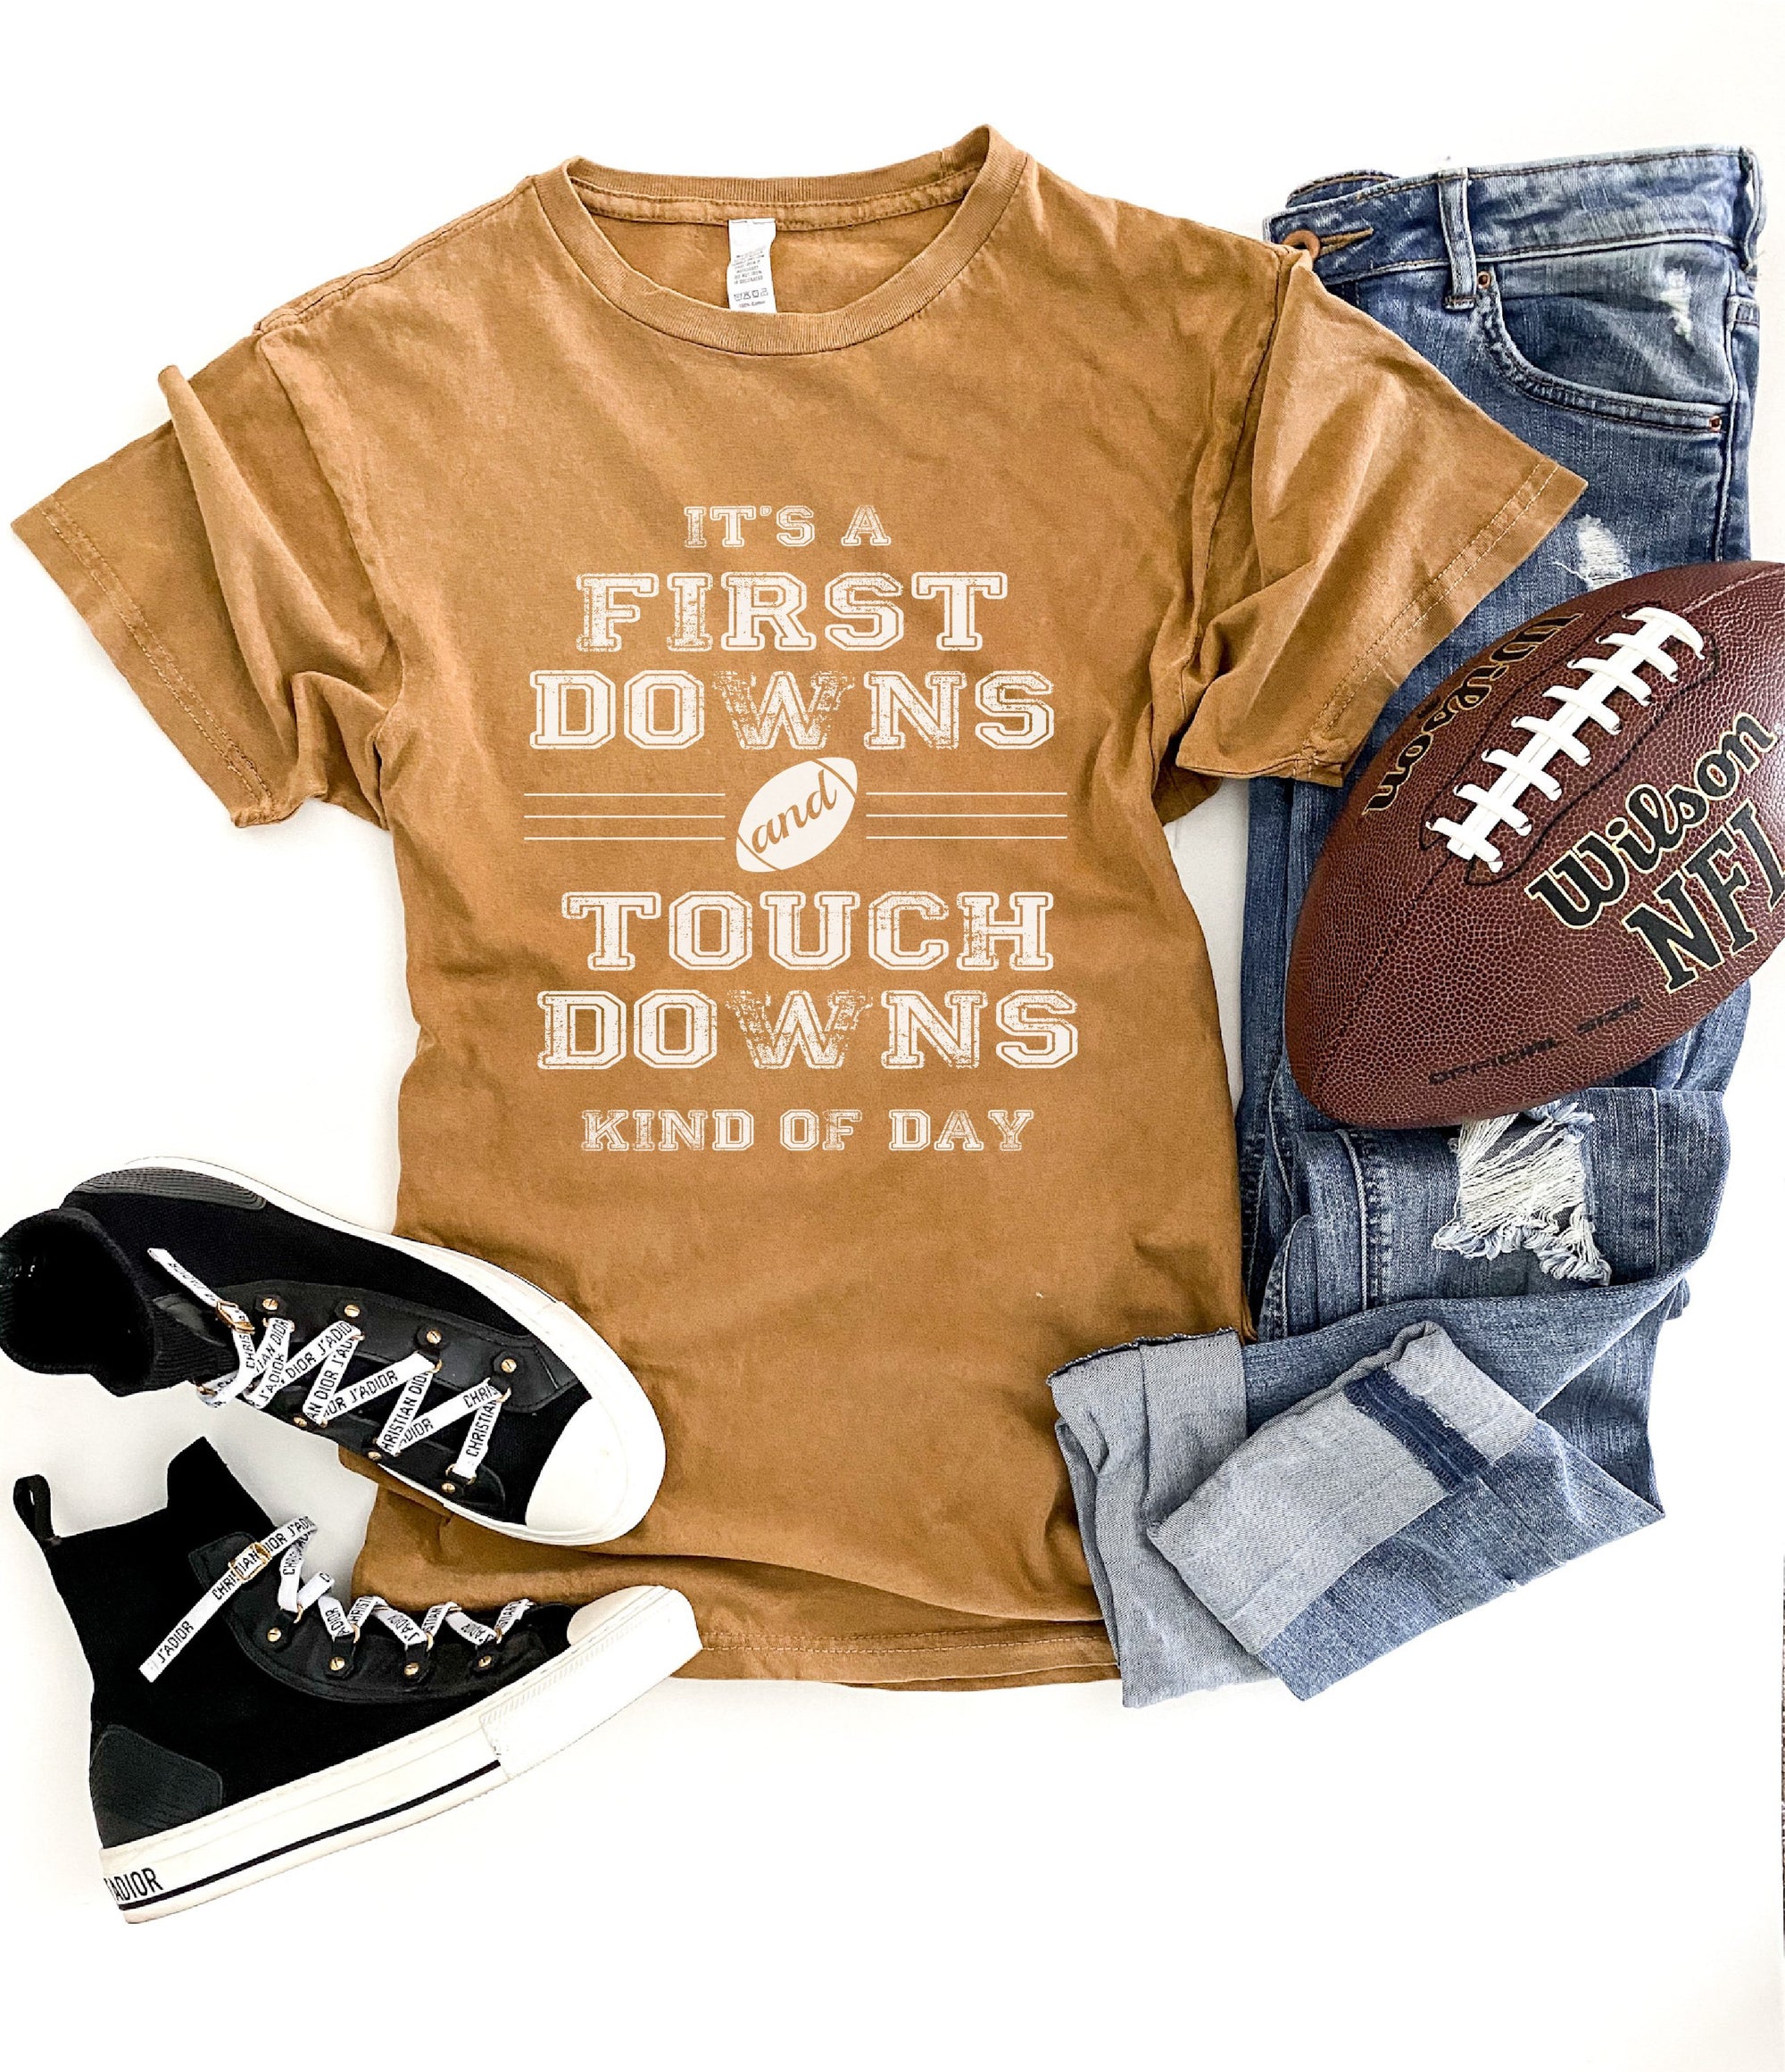 First downs and touchdowns unisex vintage wash tee Short sleeve football tee Lane seven vintage wash tee 